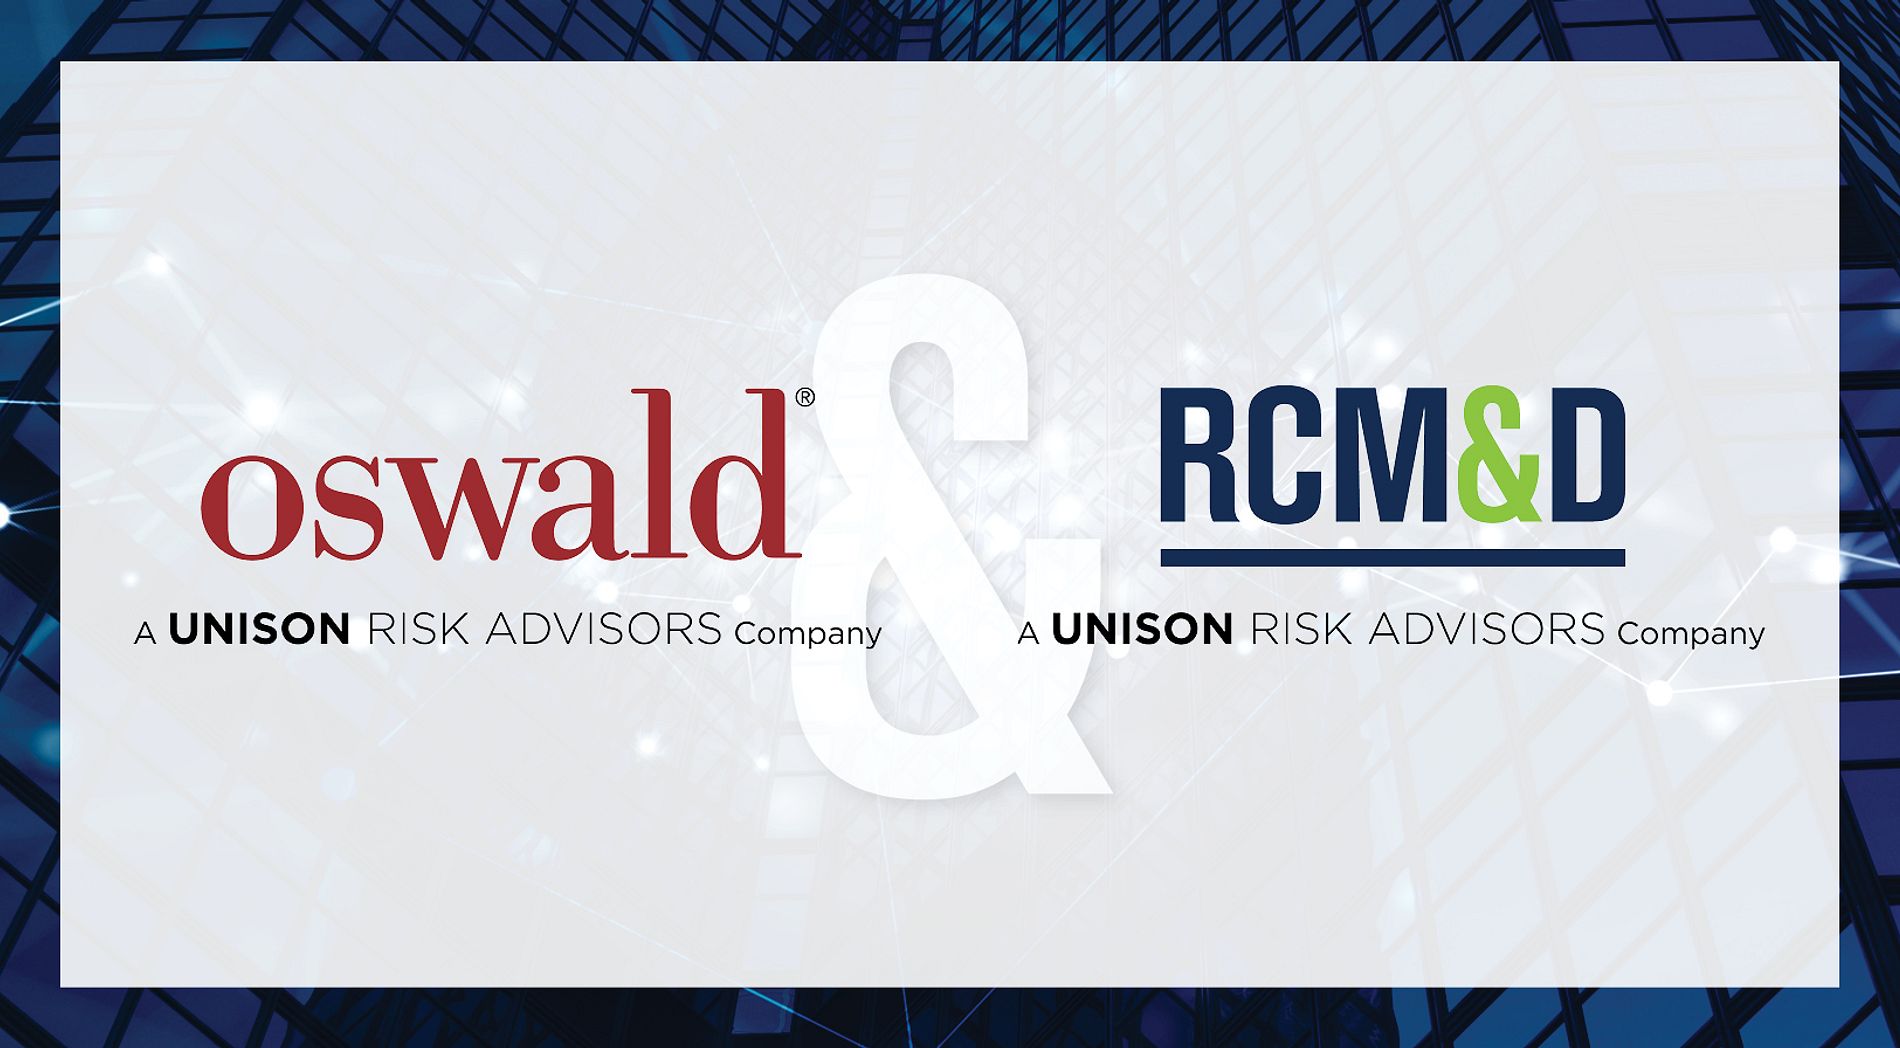 Oswald Companies and RCM&D Announce Strategic Merger